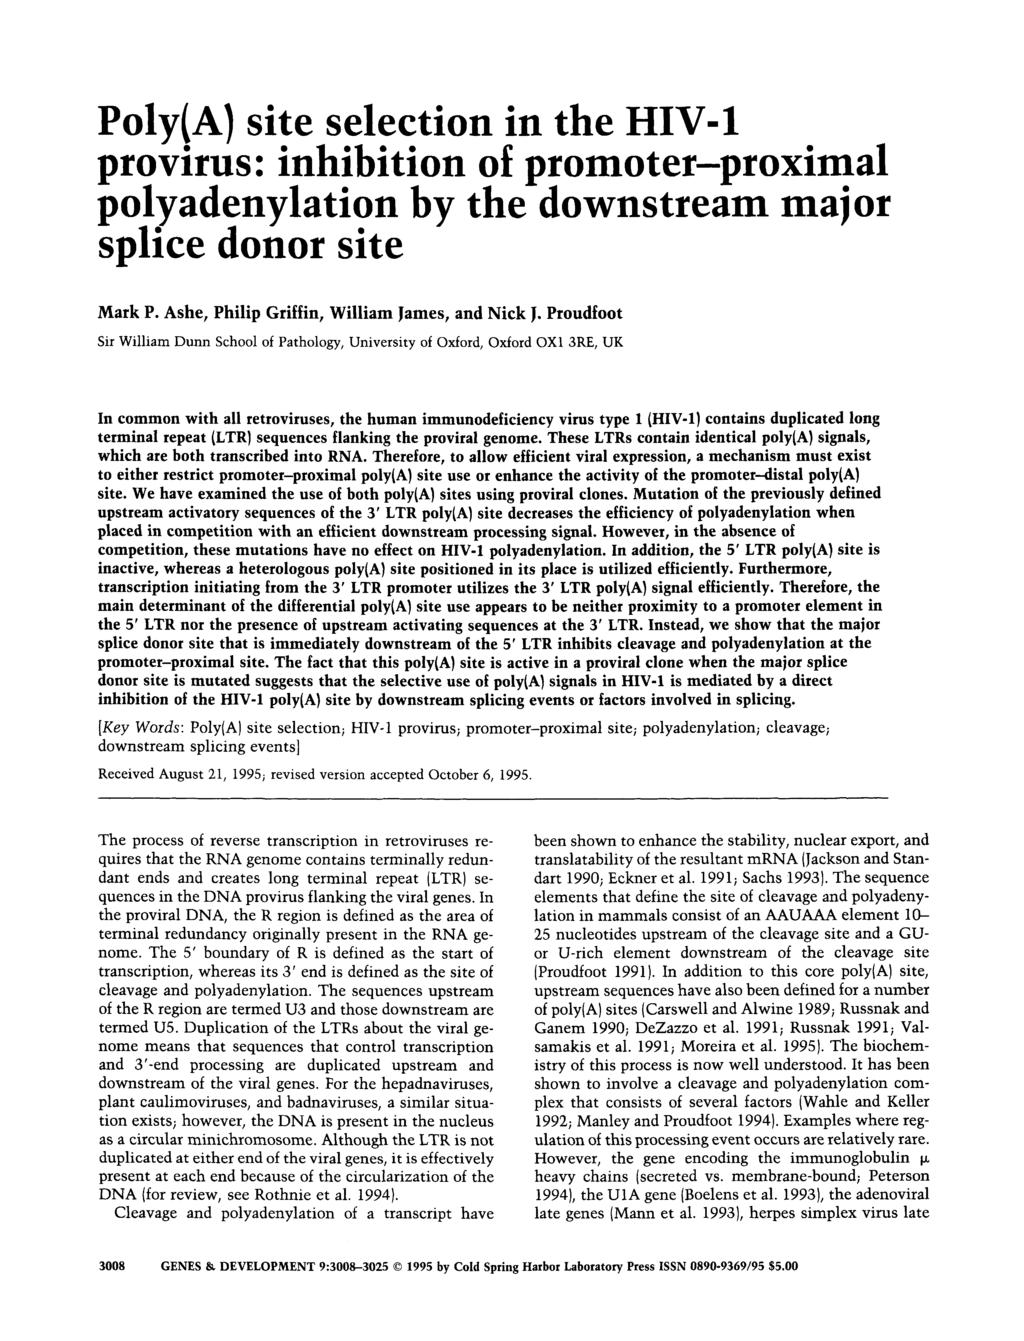 Poly(A) site selection in the HIV-1 provirus: inhibition of promoter-proximal p~lyaden~lation d A by thddownstreim major splice donor site Mark P. Ashe, Philip Griffin, William James, and Nick J.